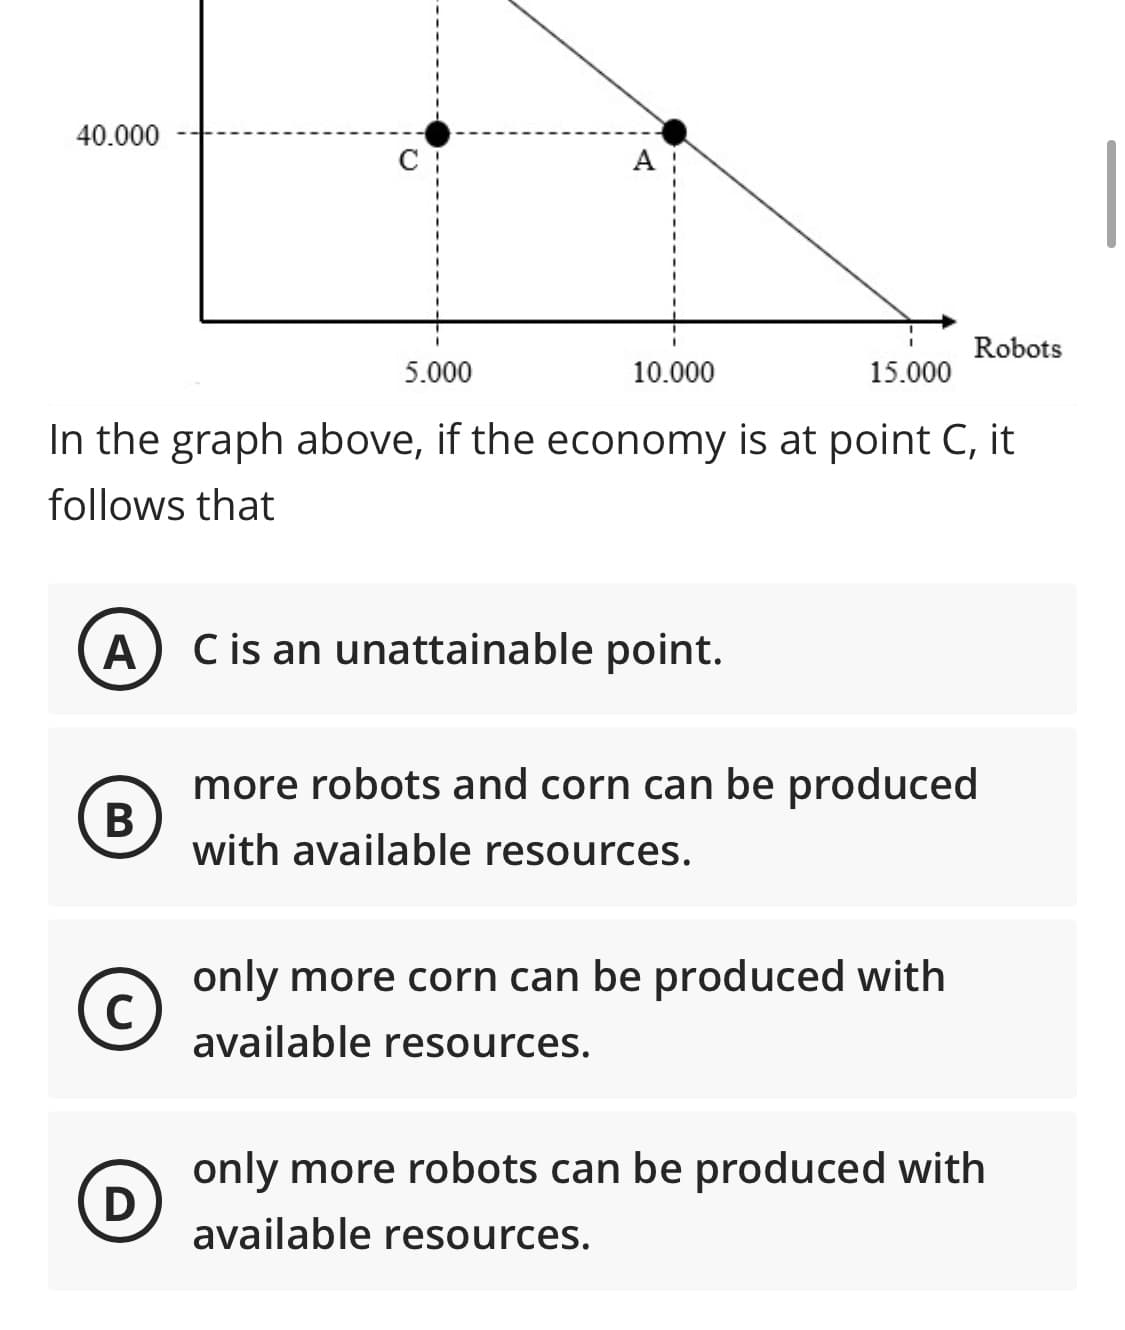 40.000
C
Robots
5.000
10.000
15.000
In the graph above, if the economy is at point C, it
follows that
A
C is an unattainable point.
more robots and corn can be produced
B
with available resources.
only more corn can be produced with
C
available resources.
only more robots can be produced with
available resources.
